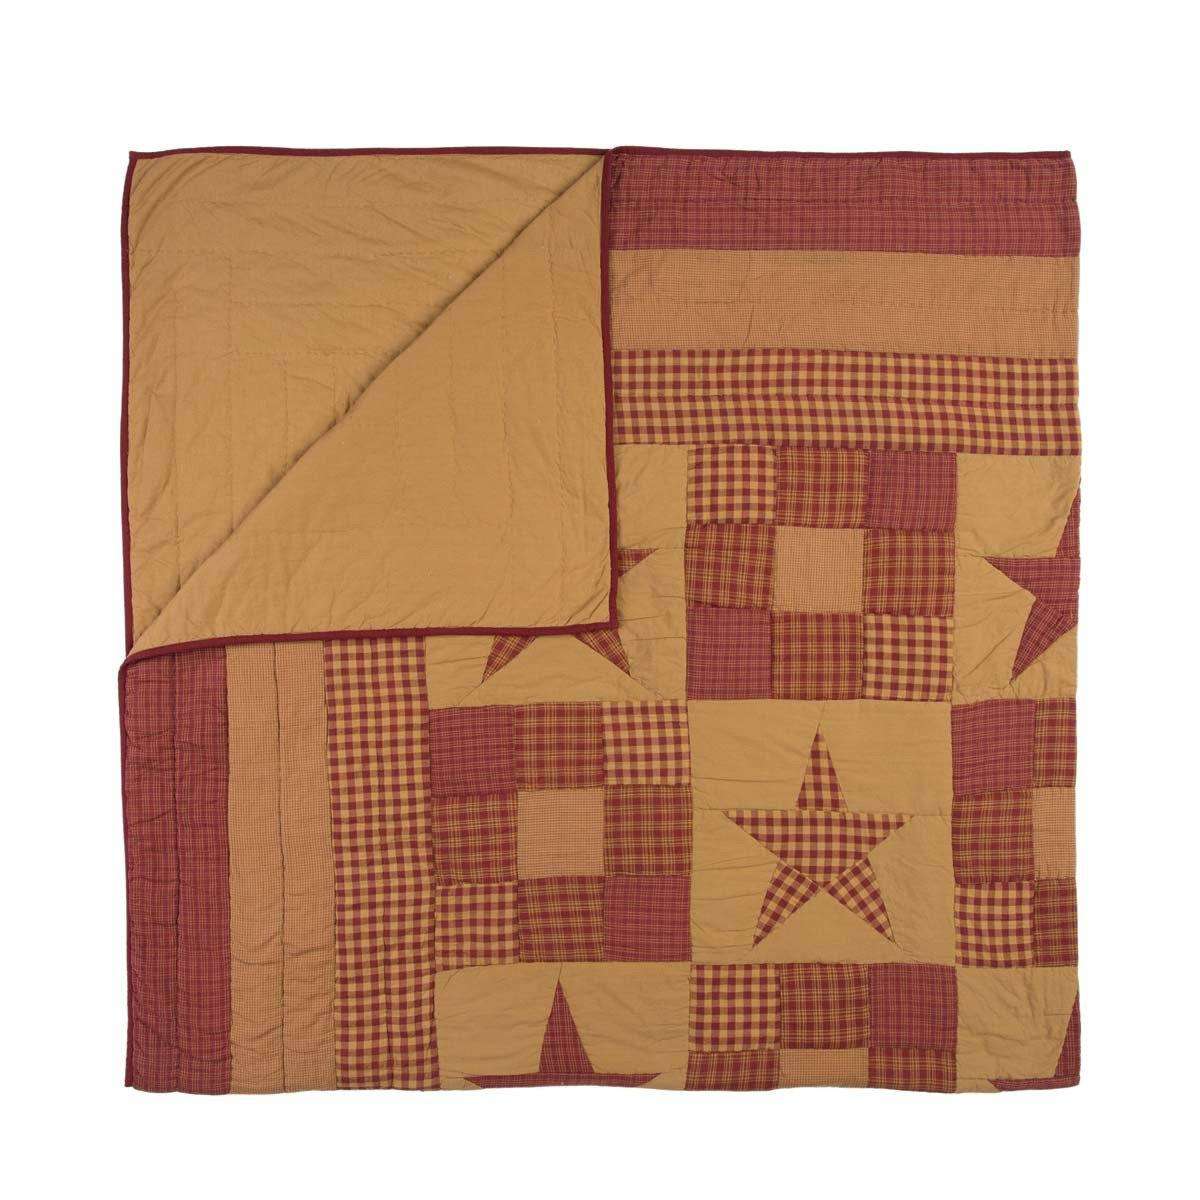 Ninepatch Star California King Quilt 130Wx115L VHC Brands folded